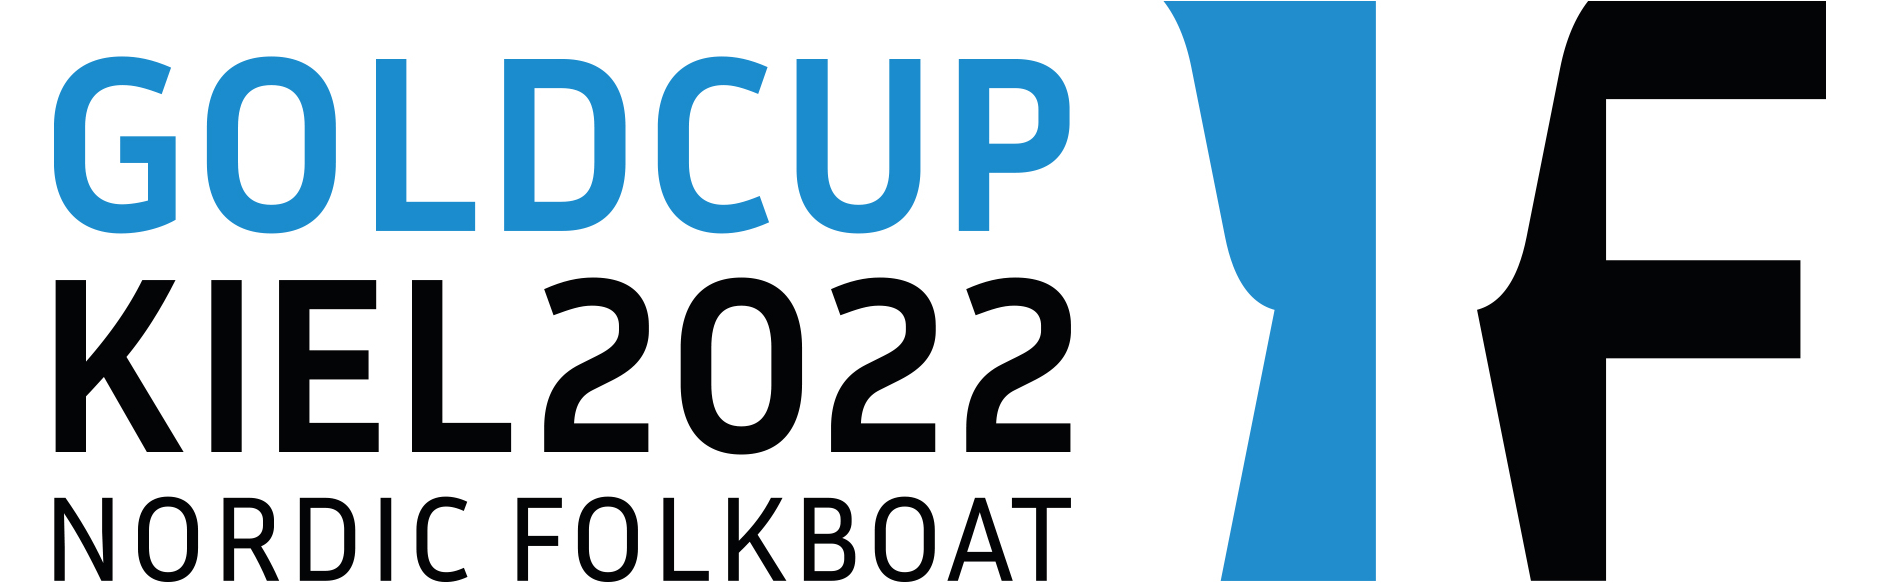 Goldcup2022